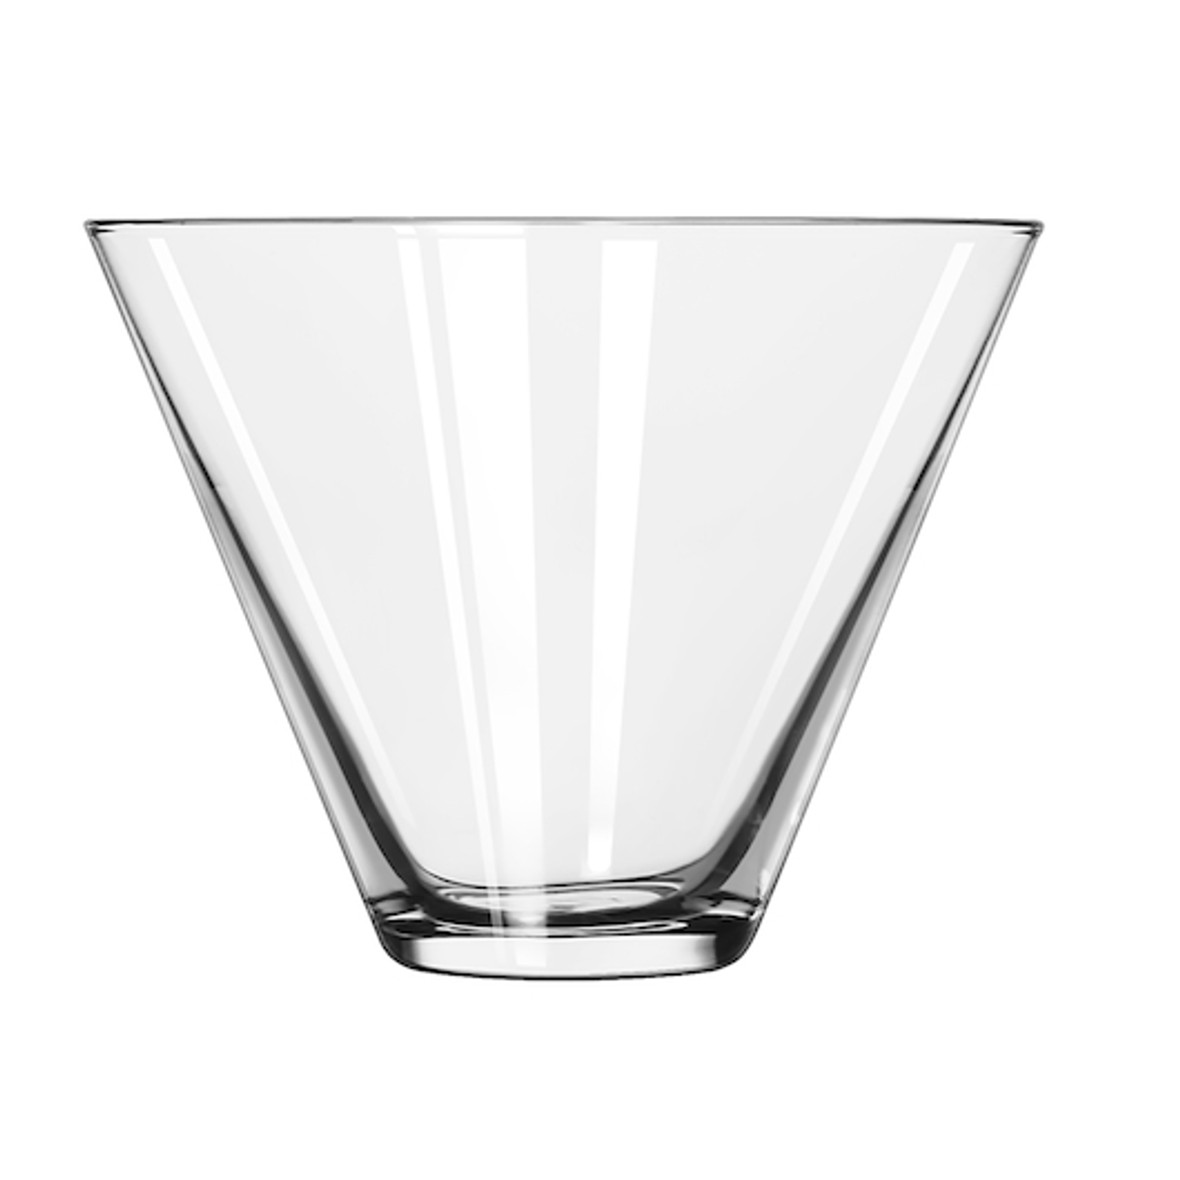 Libbey Stemless Martini Glass, 13.5 Ounce, 12 per case